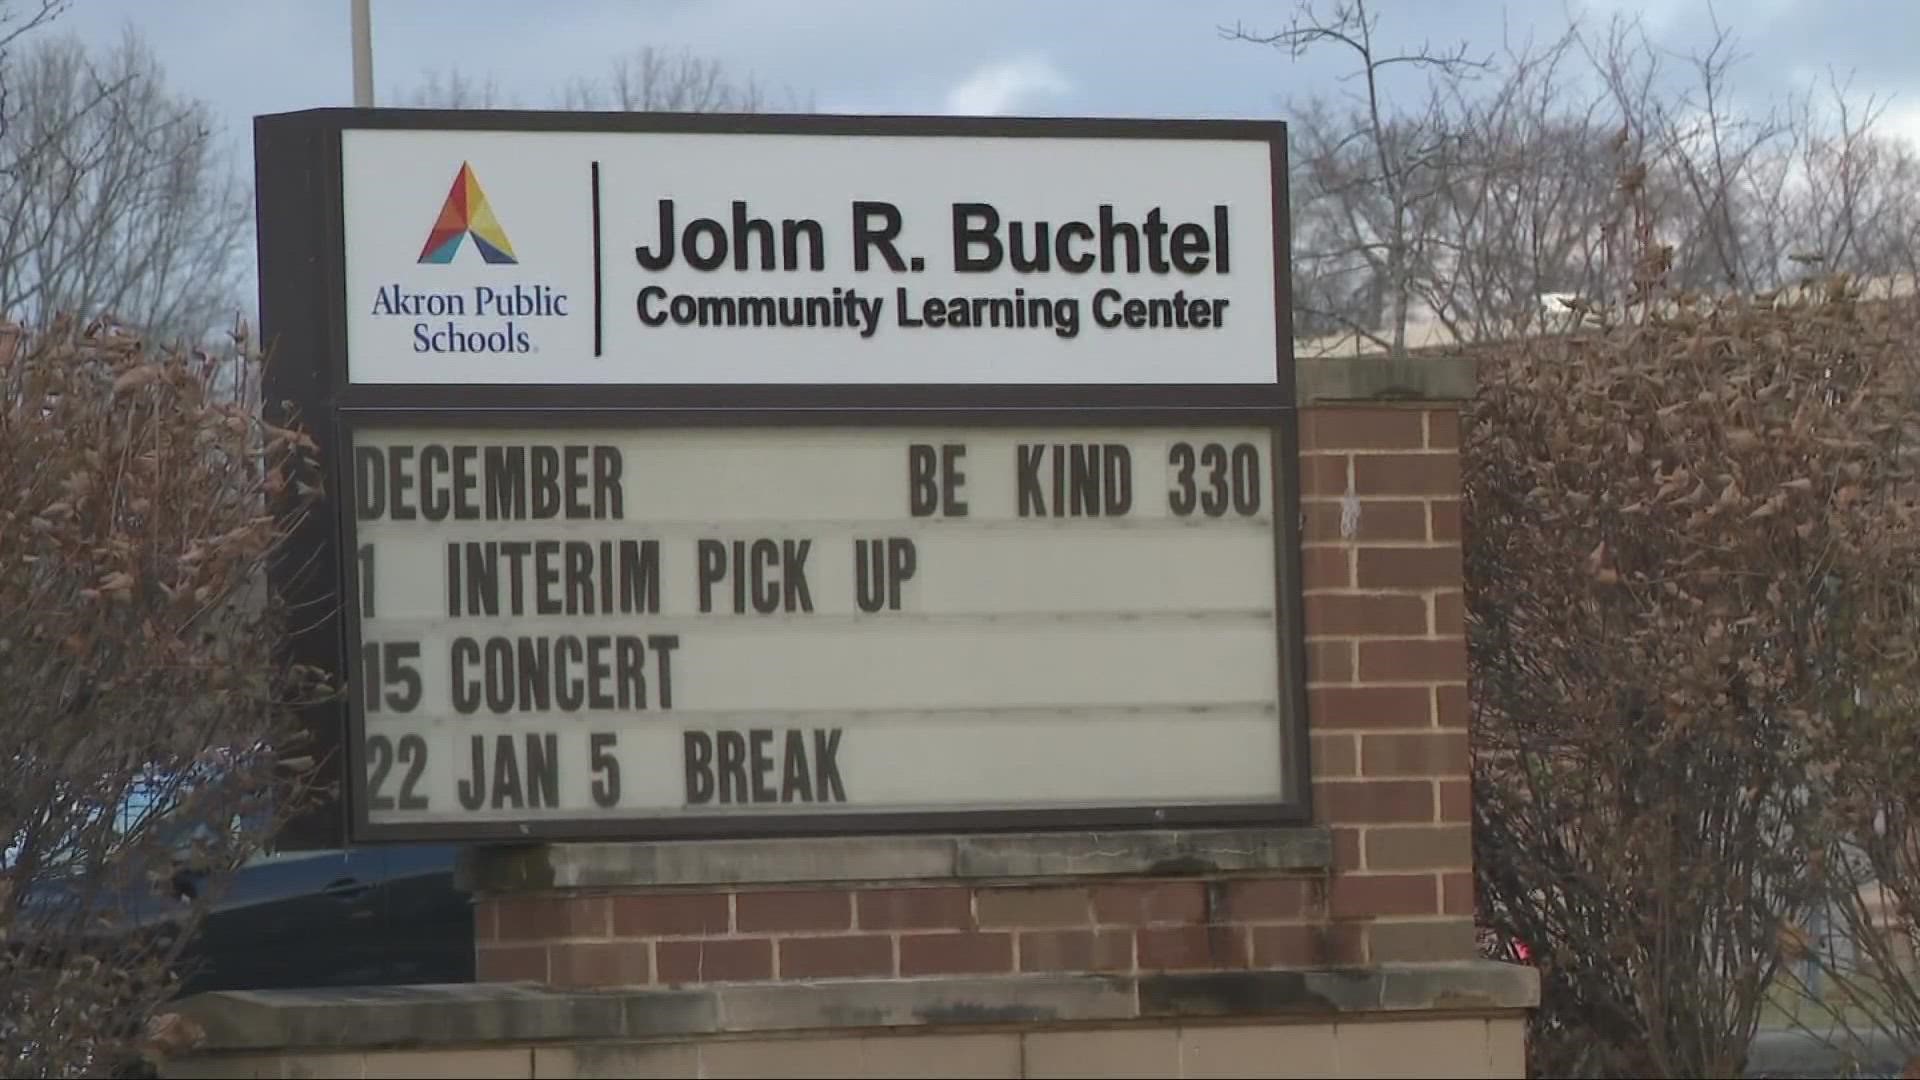 A 17-year-old suspected was stabbed with a pocket knife during an altercation at Buchtel CLC in Akron.